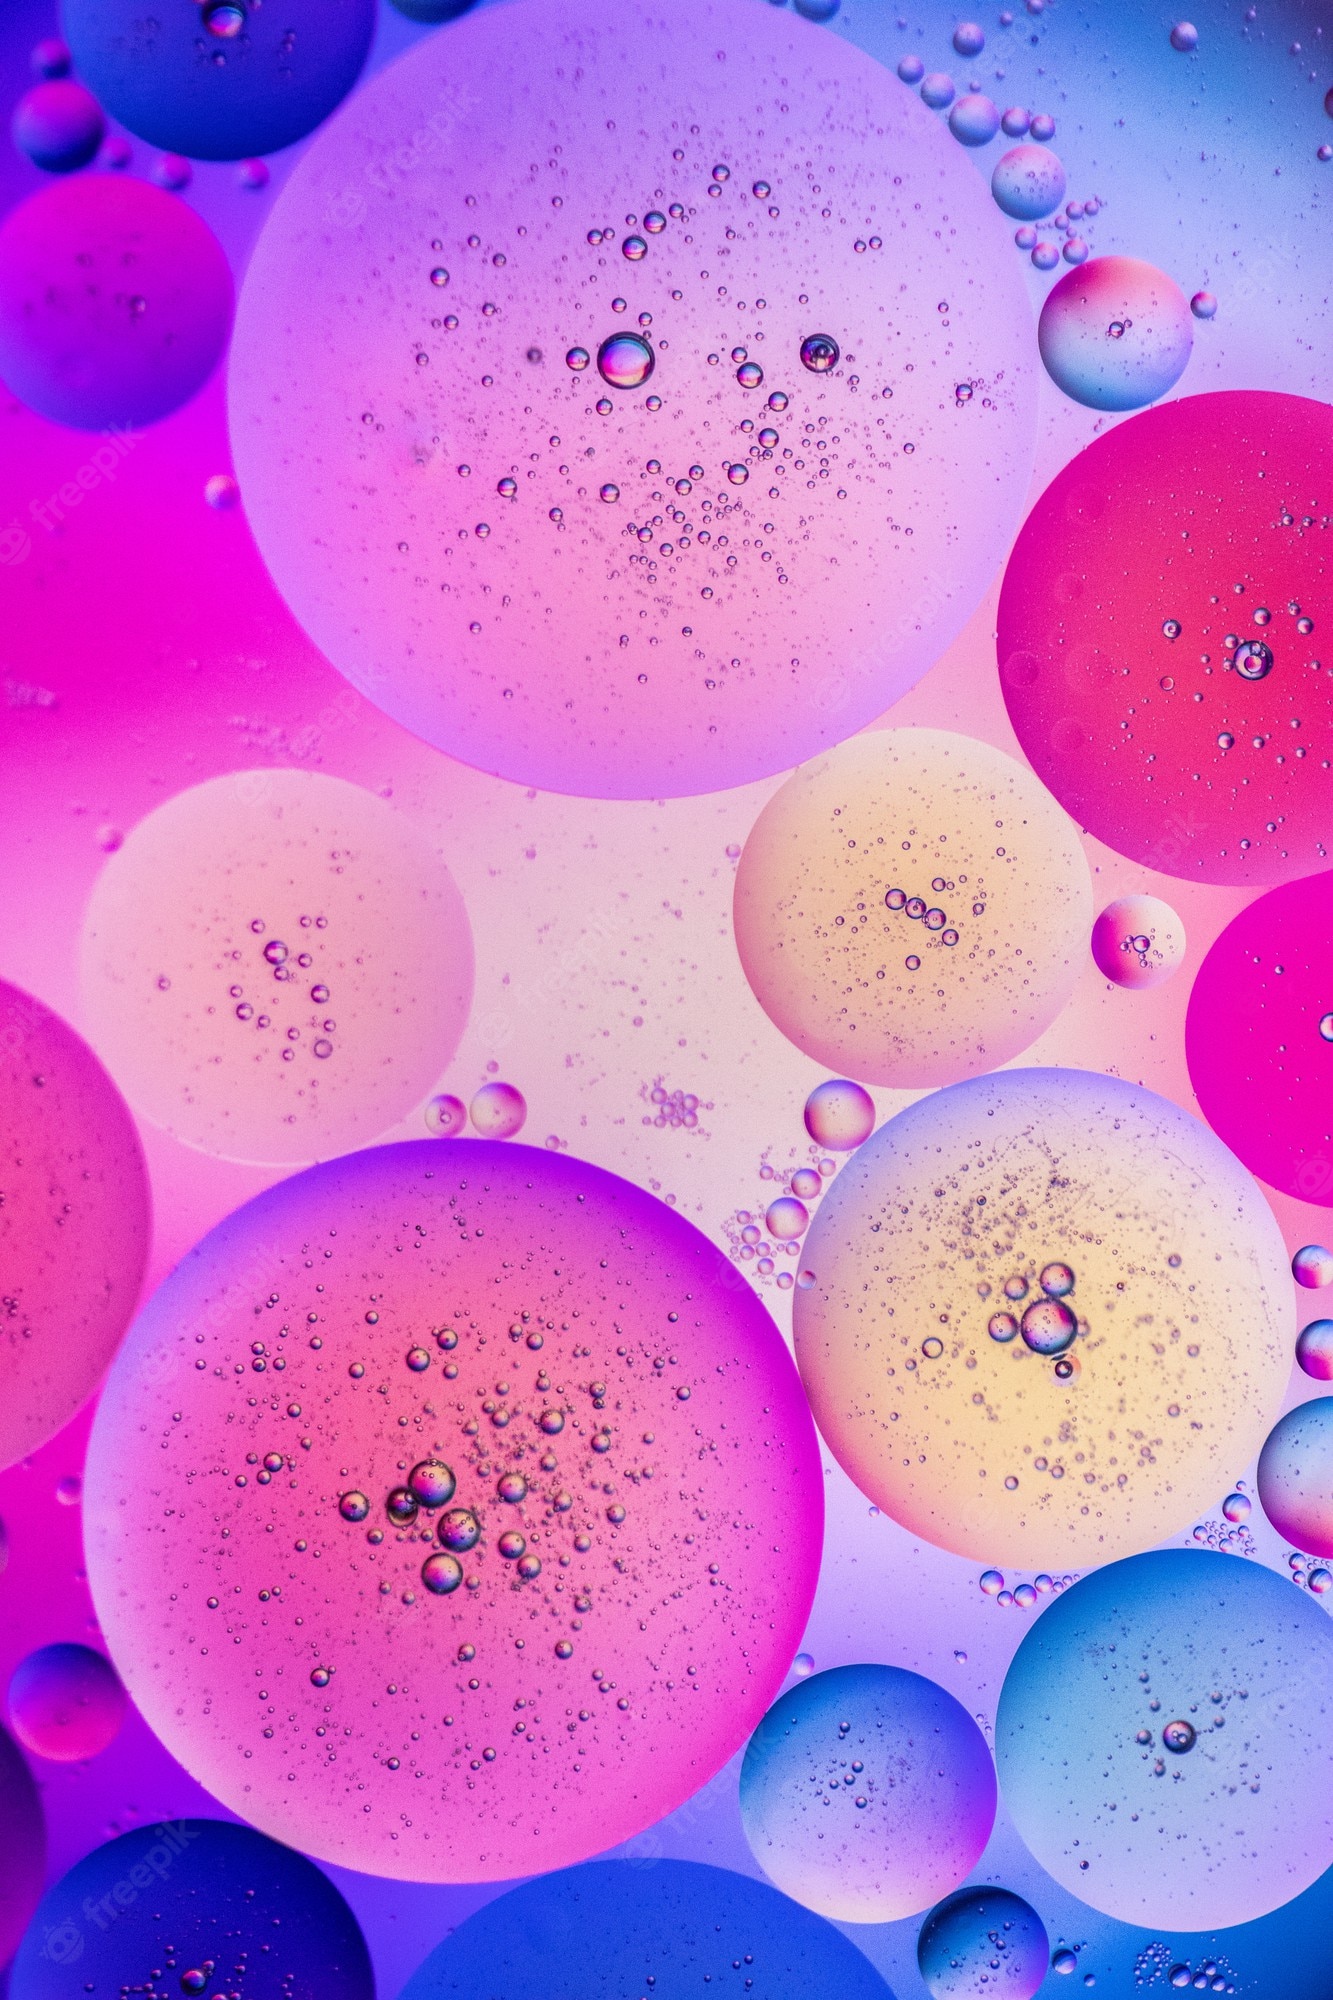 Free Photo. Vertical illustration of aesthetic refreshing purple, pink and blue bubbles